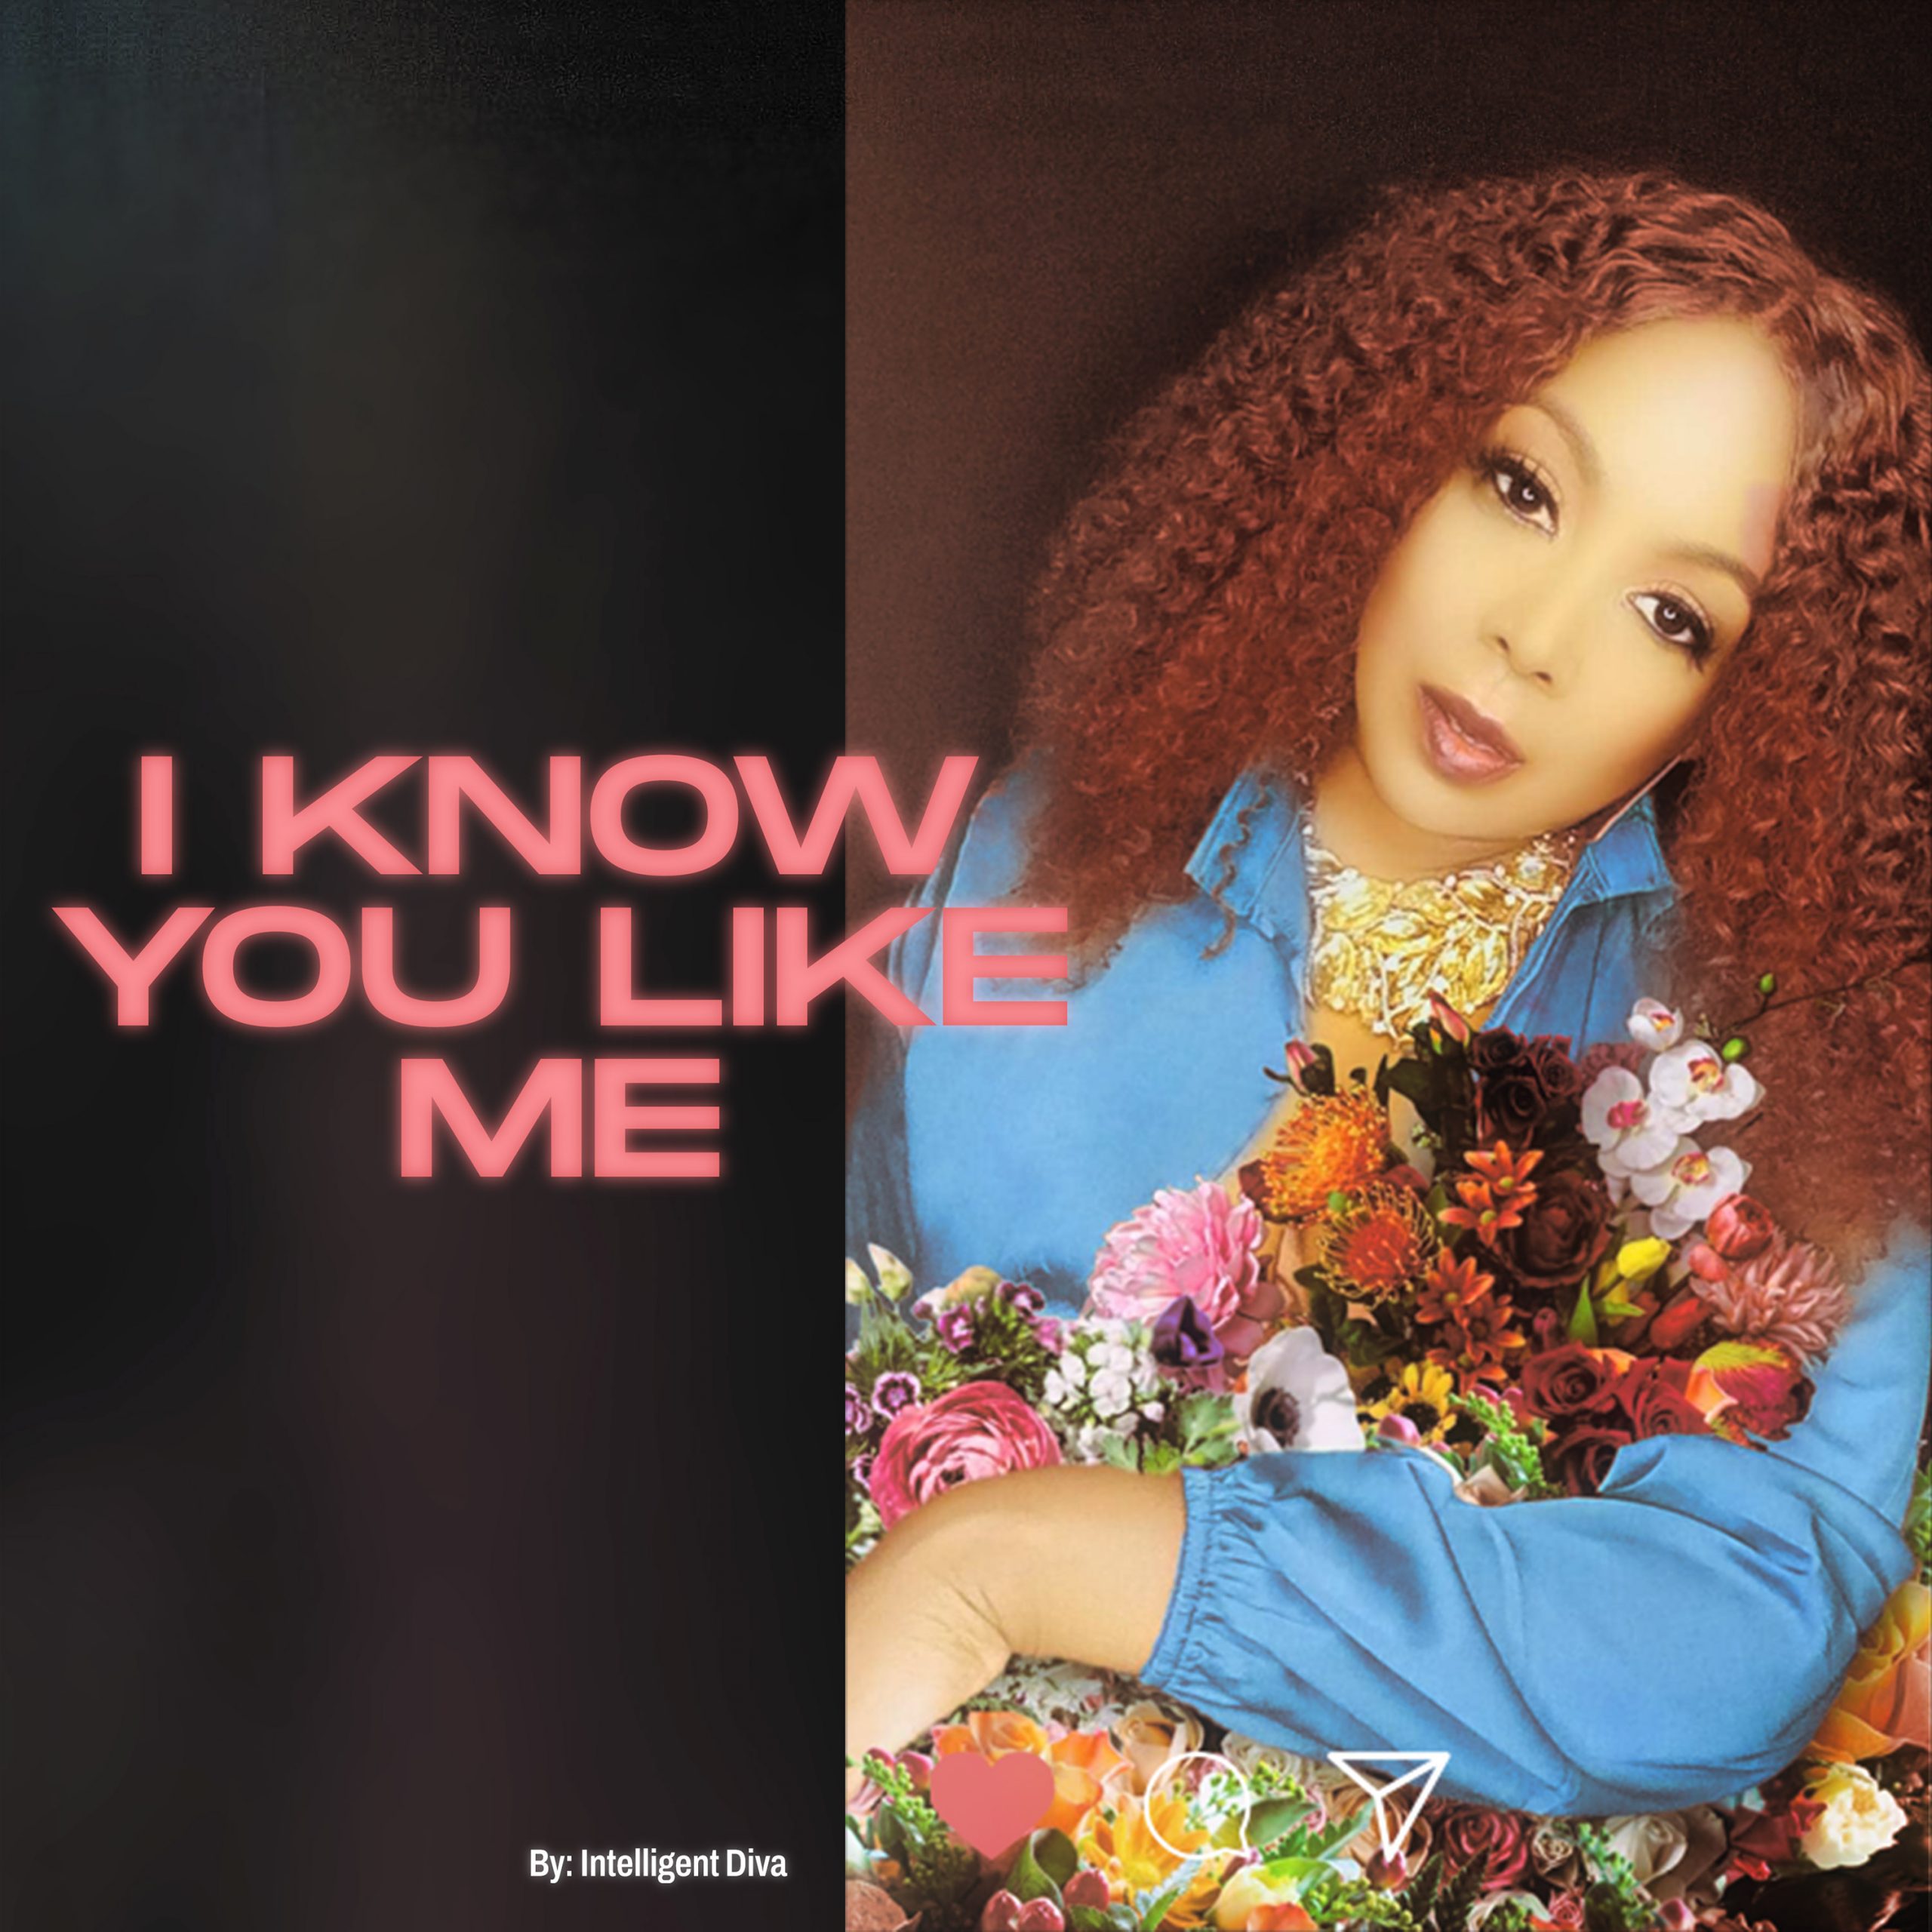 The new single ‘I Know You Like Me’ from ‘Intelligent Diva’ with its captivating, infectious, memorable and addictive sound is on the playlist now.